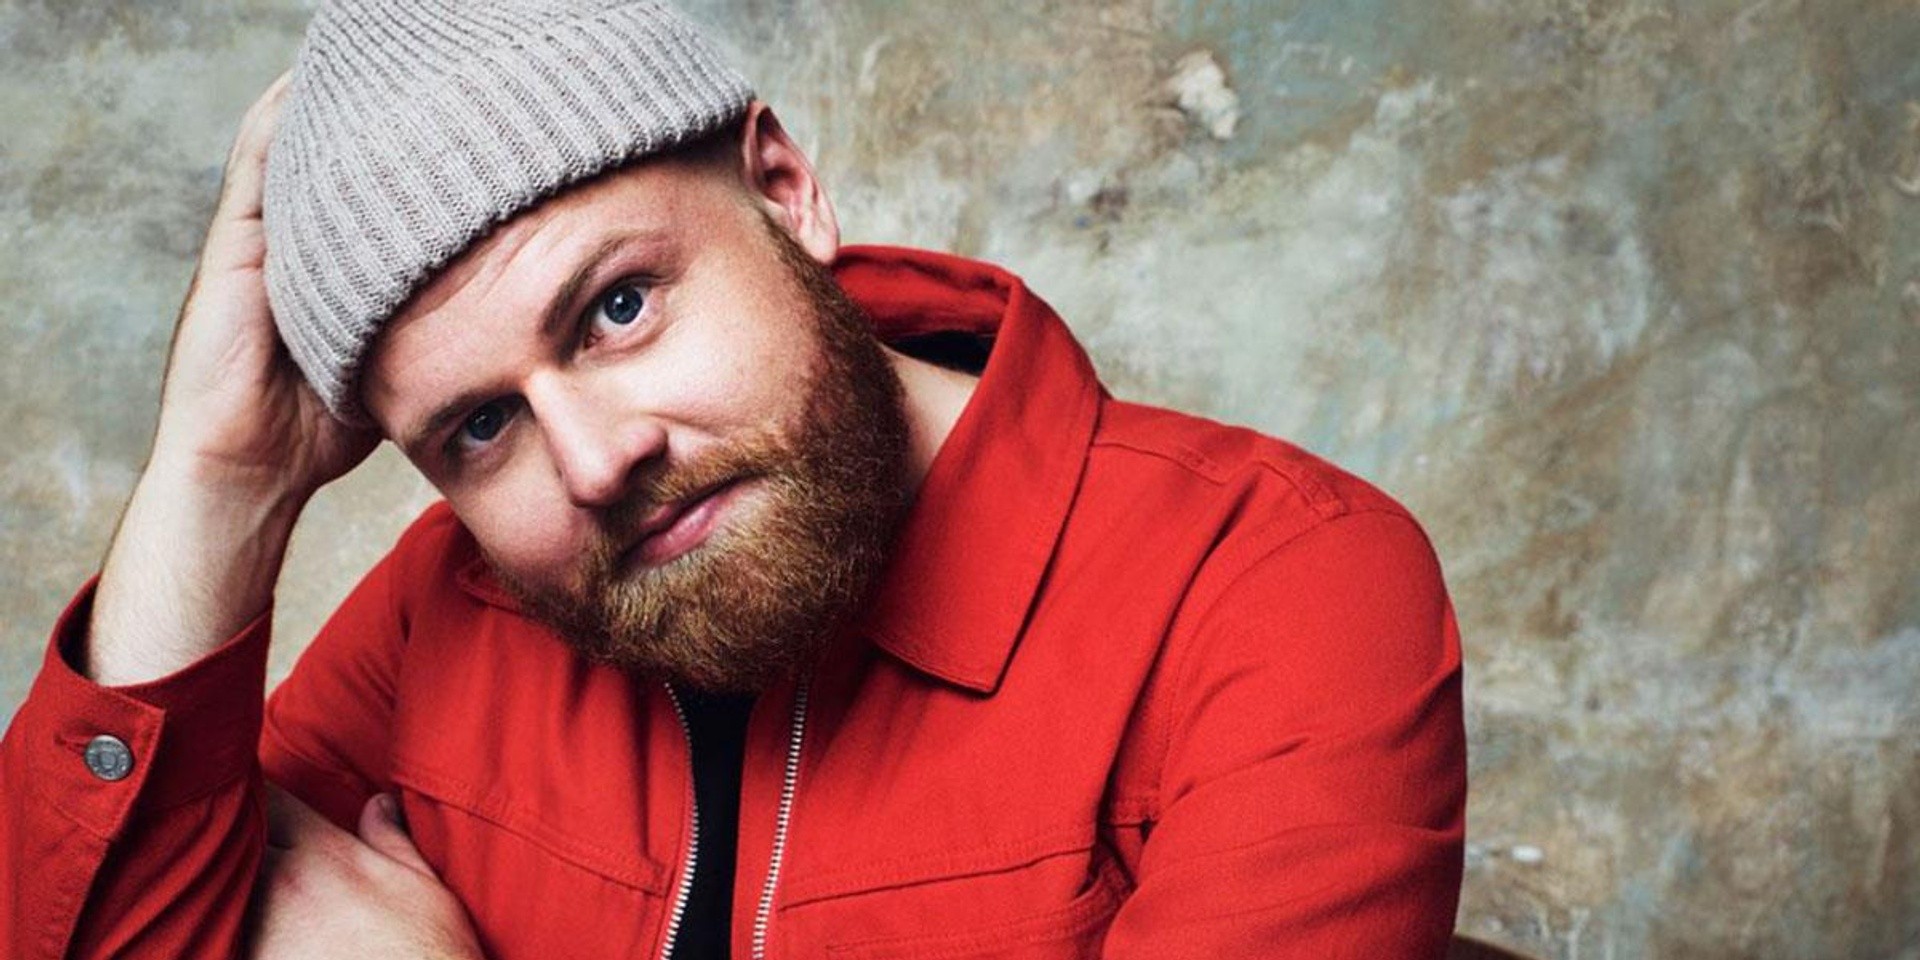 Tom Walker's Asia tour has been cancelled 